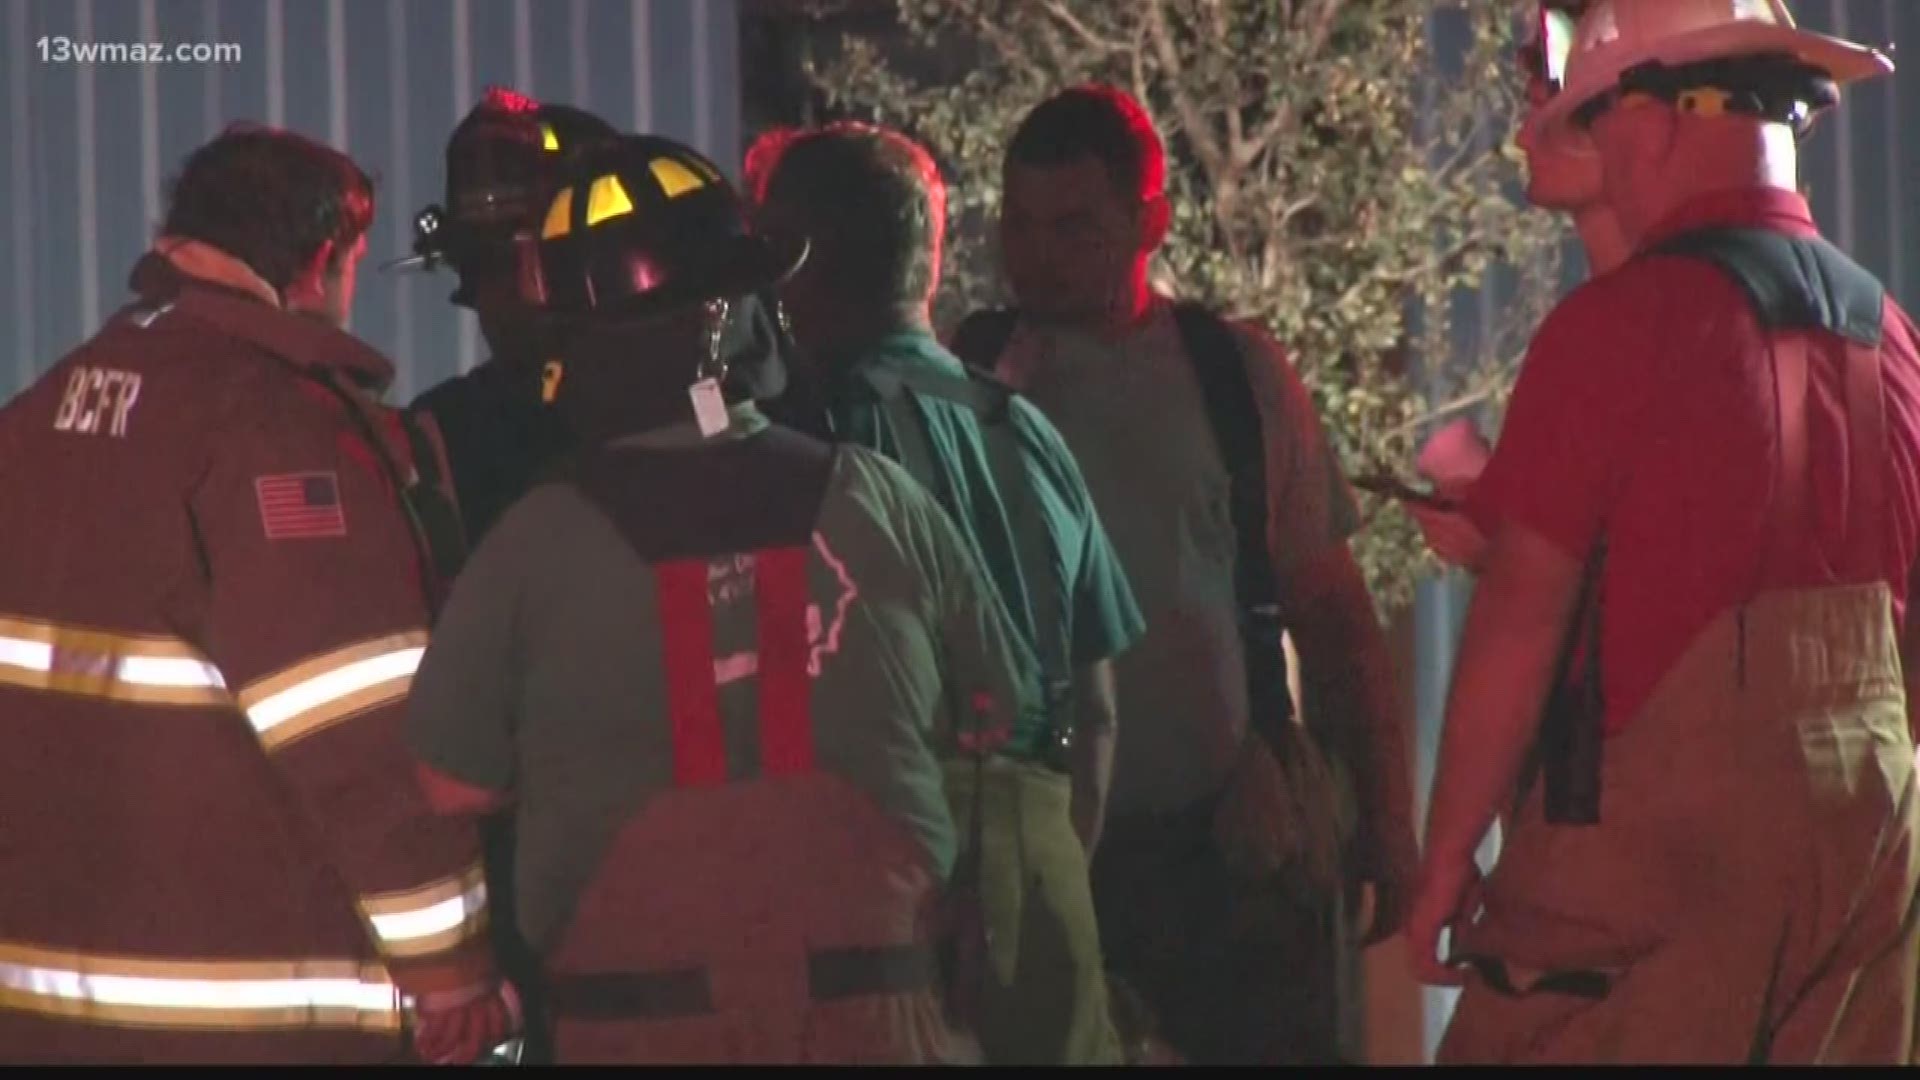 Crews in Milledgeville battled a chemical fire at the Zschimmer & Schwarz Inc. plant Monday evening.